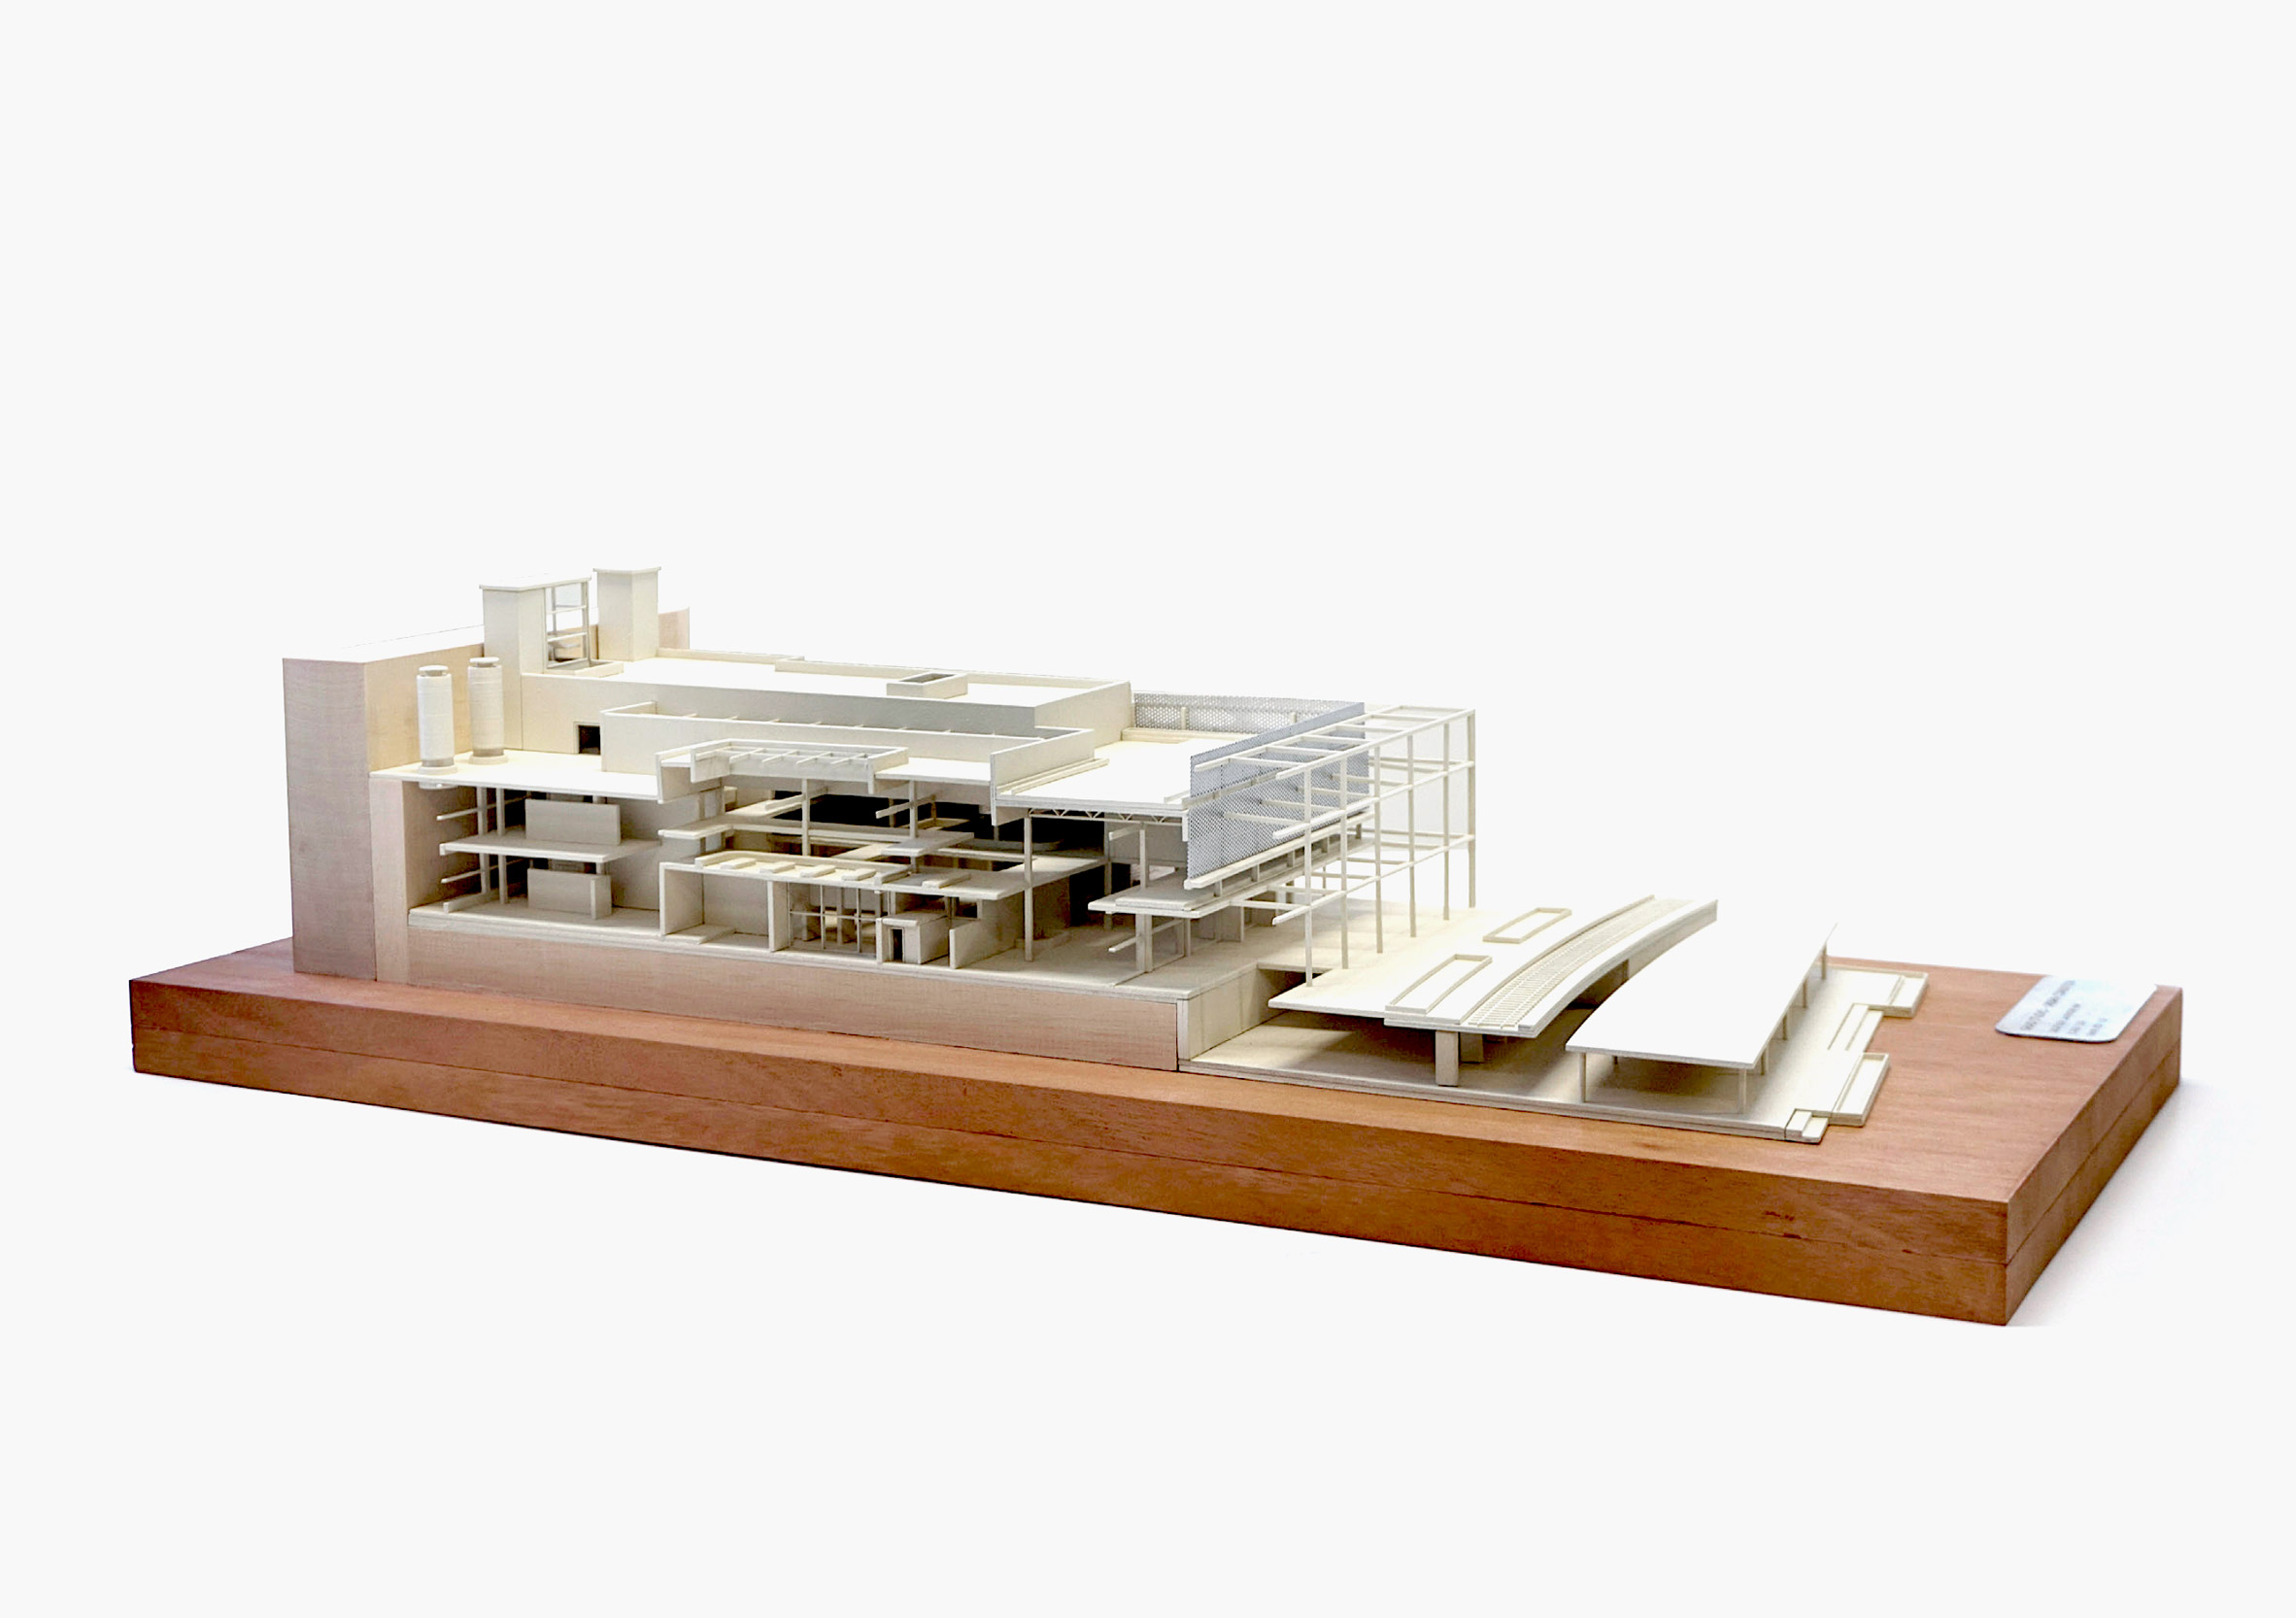 White architectural model on wooden base